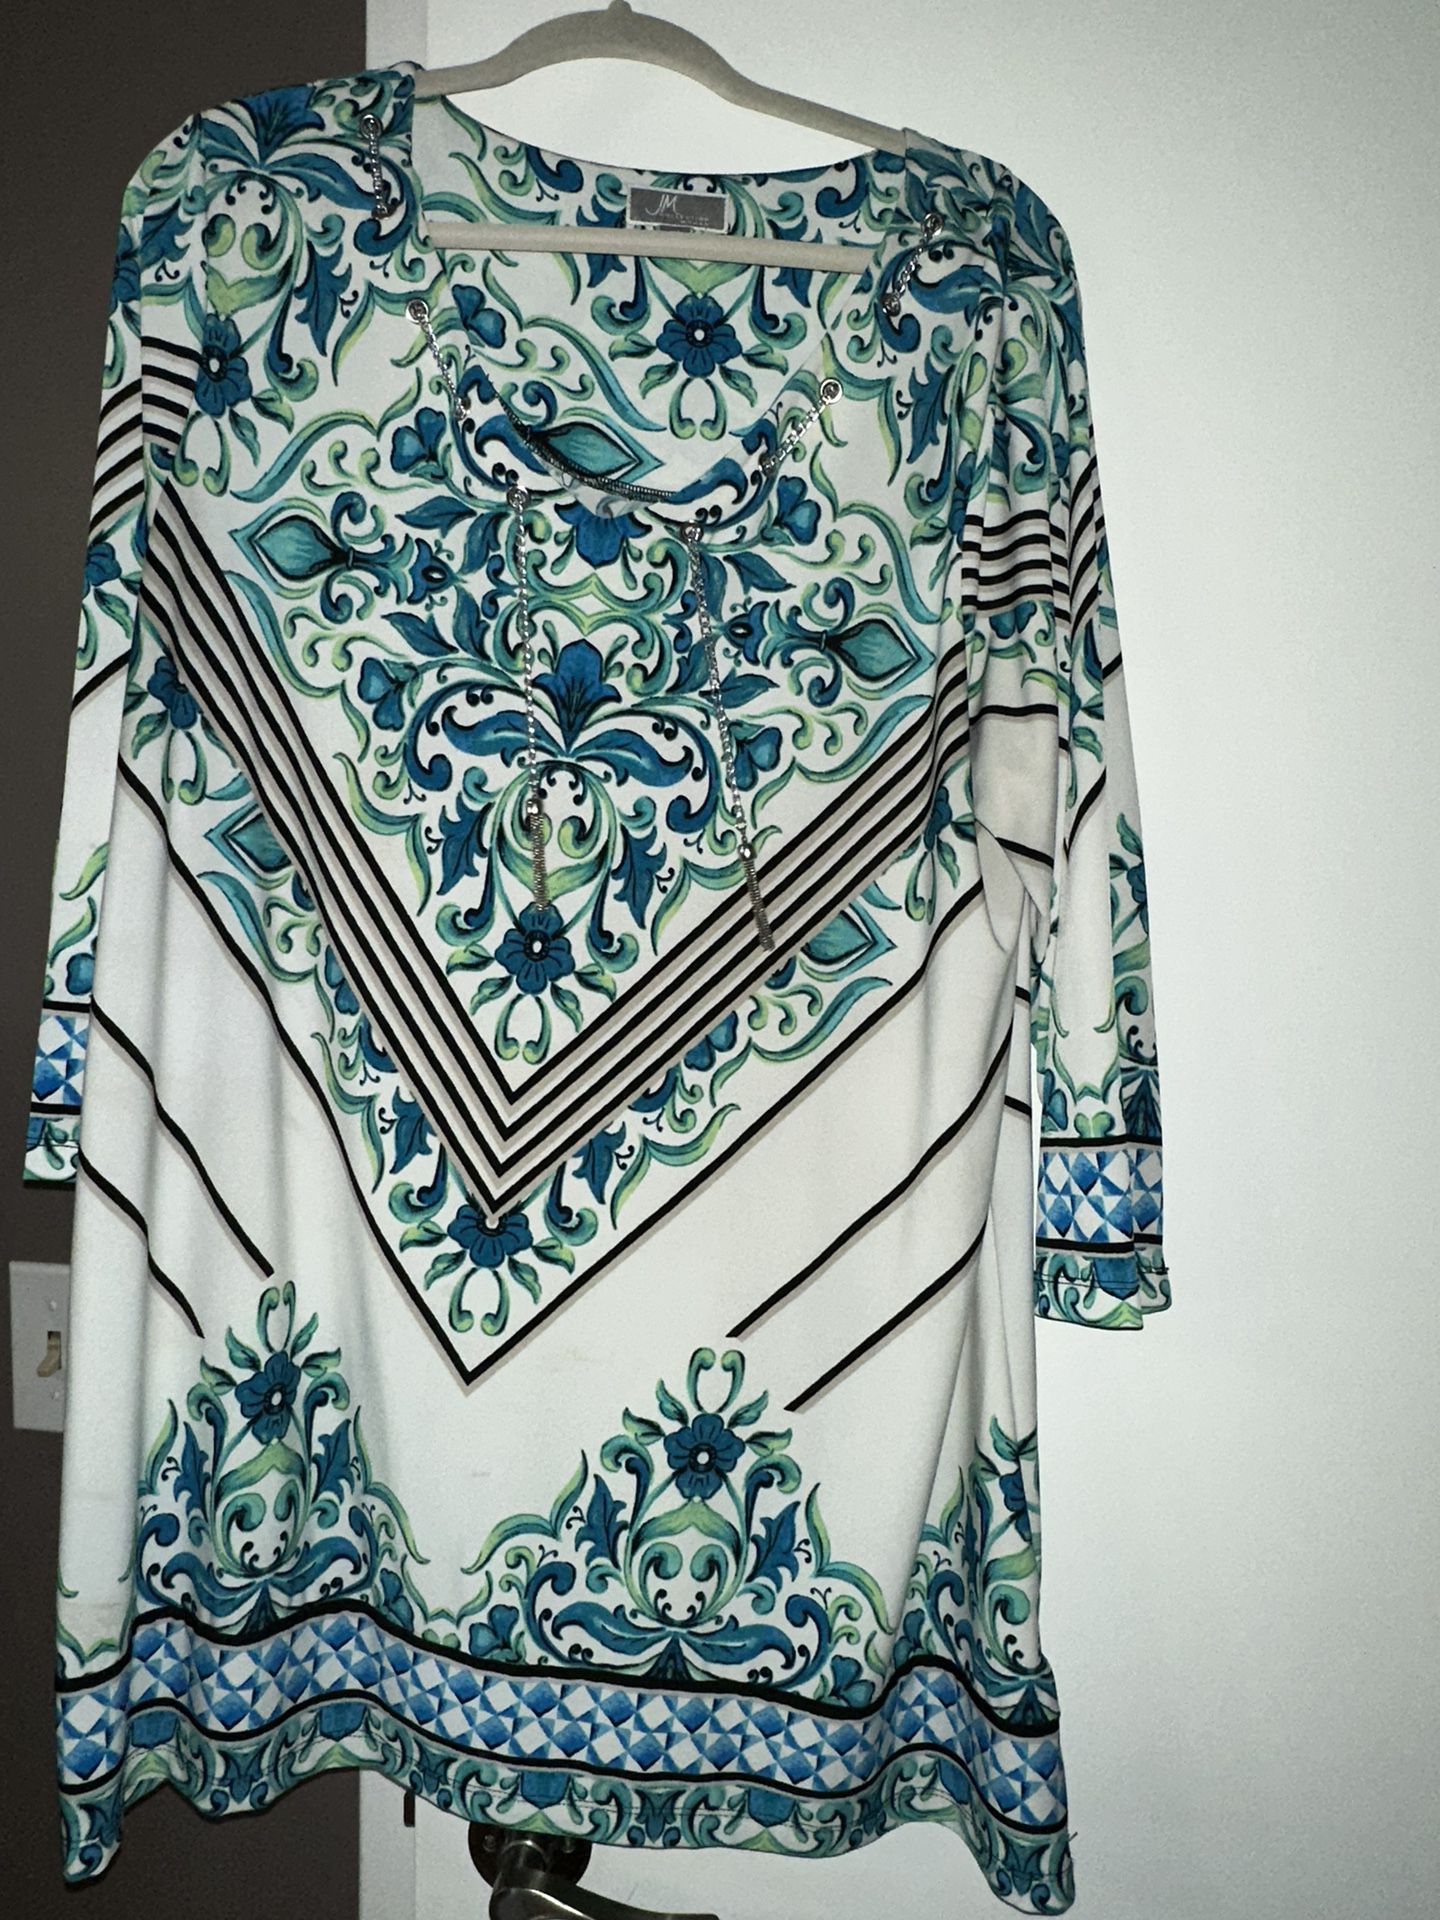 Beautiful Shirt - JM Collection (from Macy’s) - Color:  White, Green, Blue & Black  w Silver Chain Tie - Size 1X 